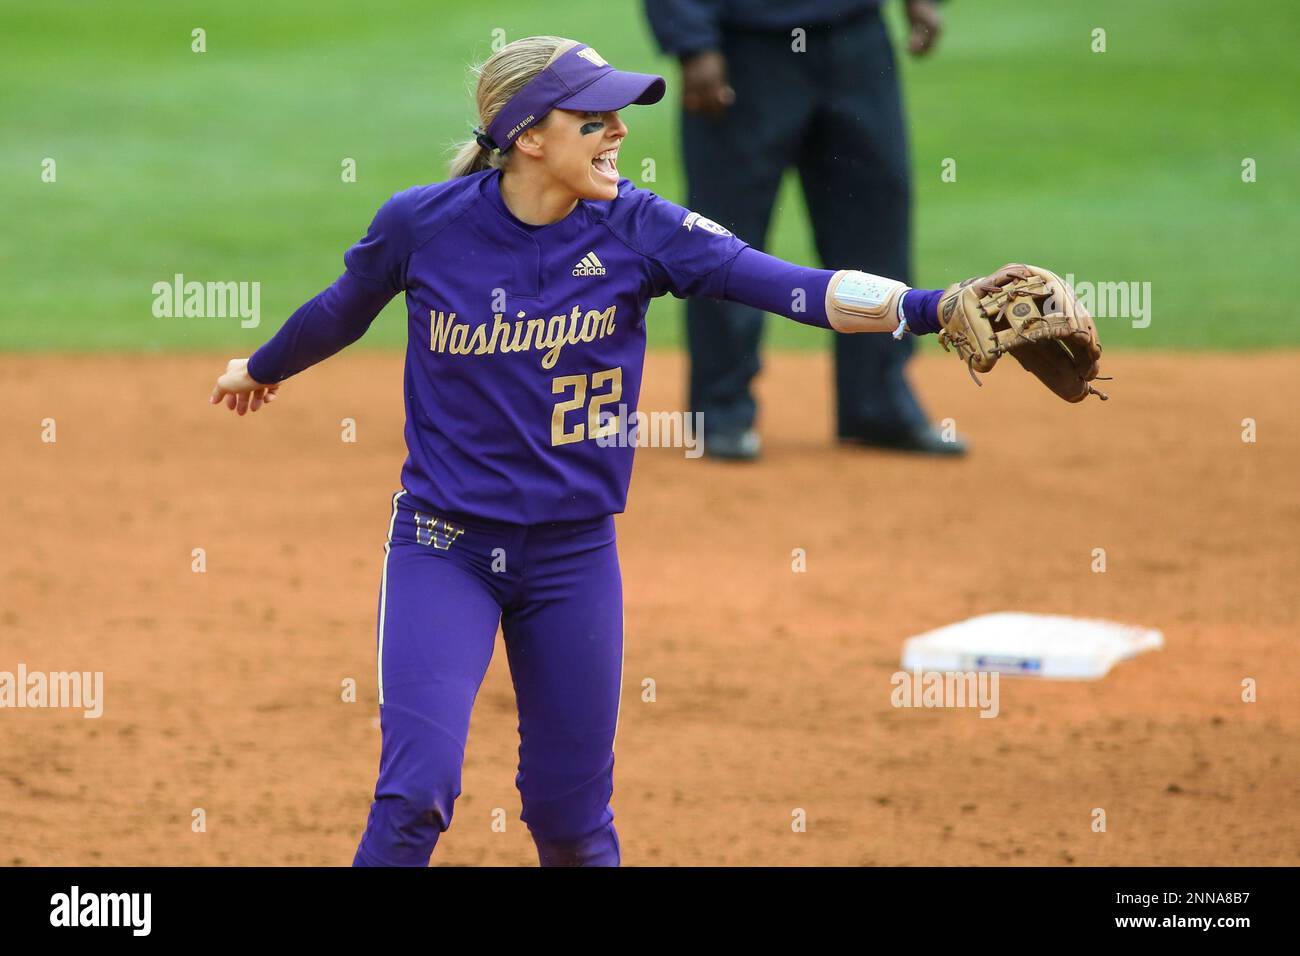 SEATTLE, WA - MAY 23: Washington Huskies infielder Sis Bates (22)  celebrates a out during game 6 of the Seattle regional NCAA tournament  softball game between the Michigan Wolverines and the Washington